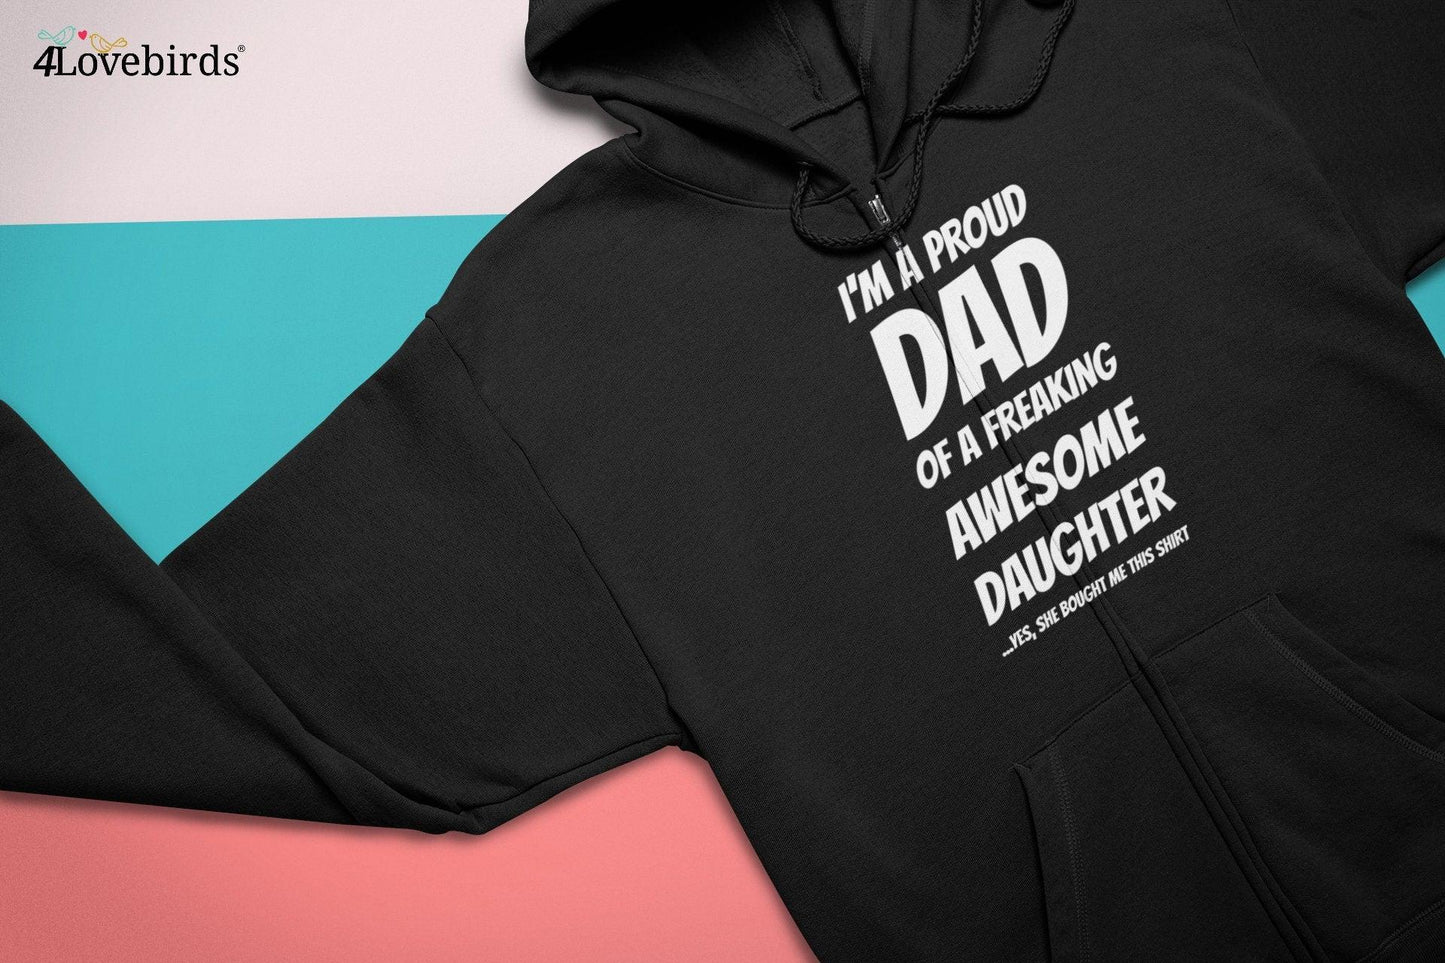 I'm a Proud Dad/Mom of a Freaking Awesome Daughter/Son | Funny Hoodie Men/Women - Fathers/Mothers Day Shirt - Sweatshirt - Dad/Mom Favorite - 4Lovebirds